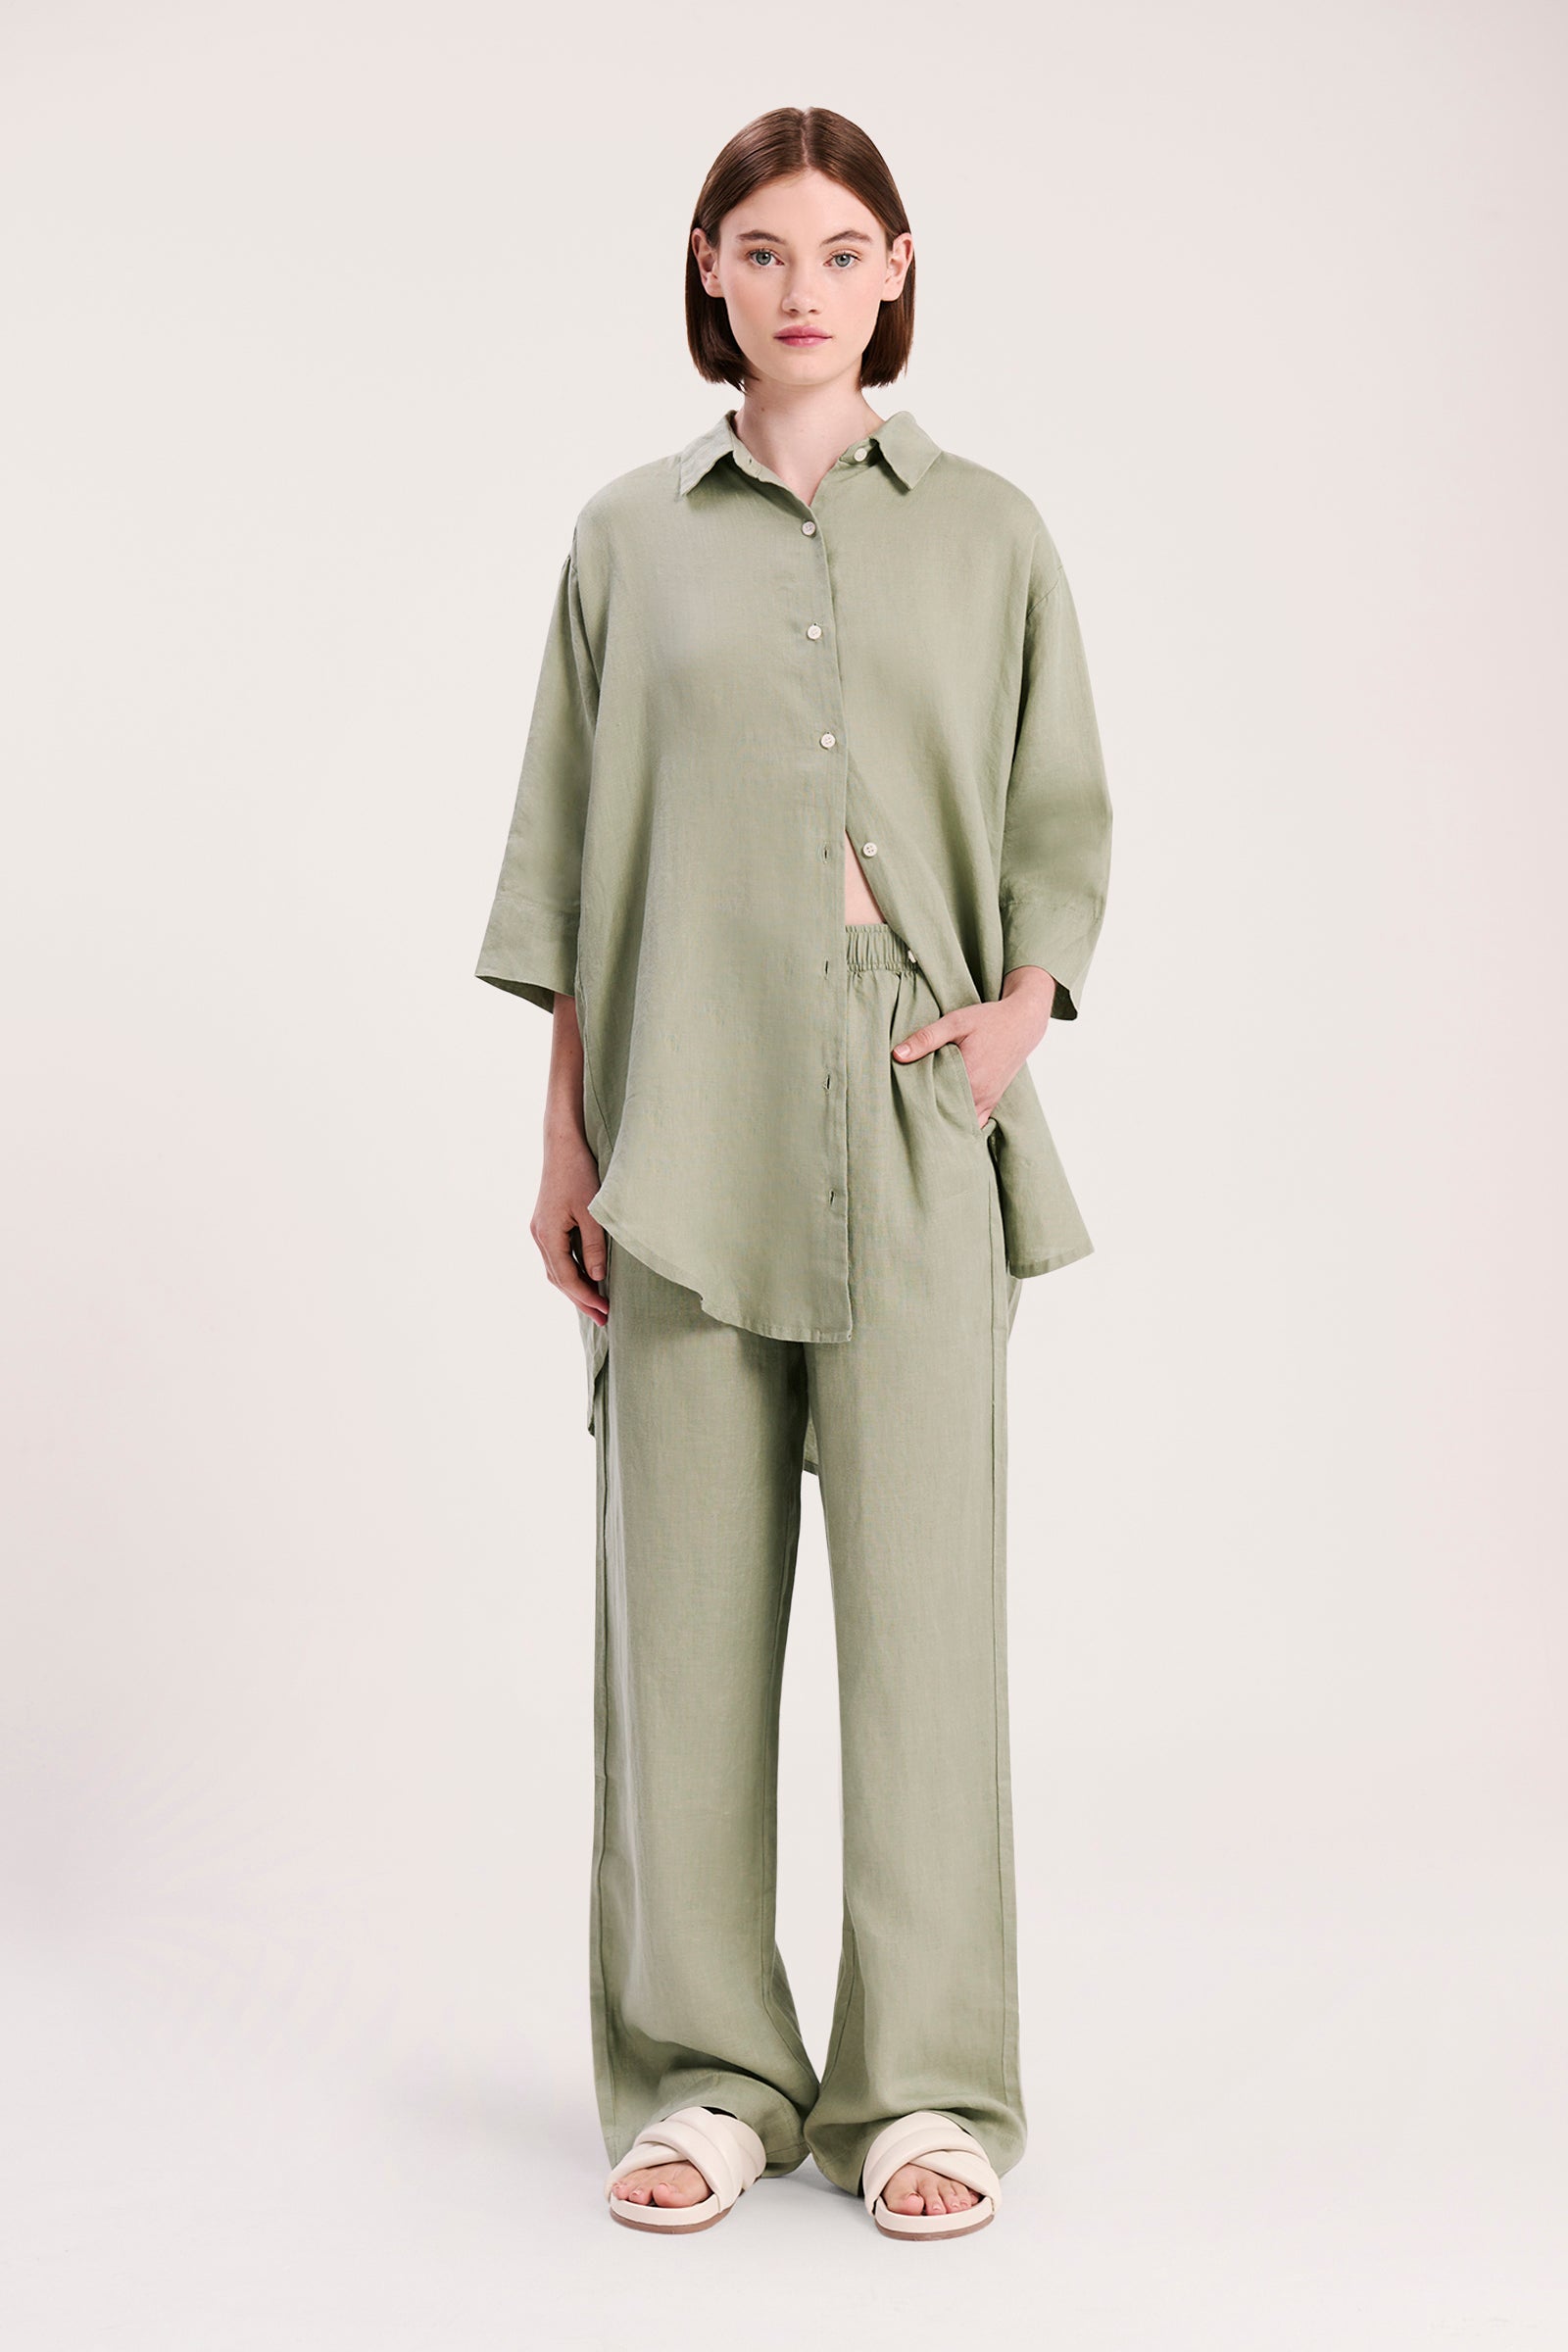 Nude Lucy Lounge Linen Pant in Olive